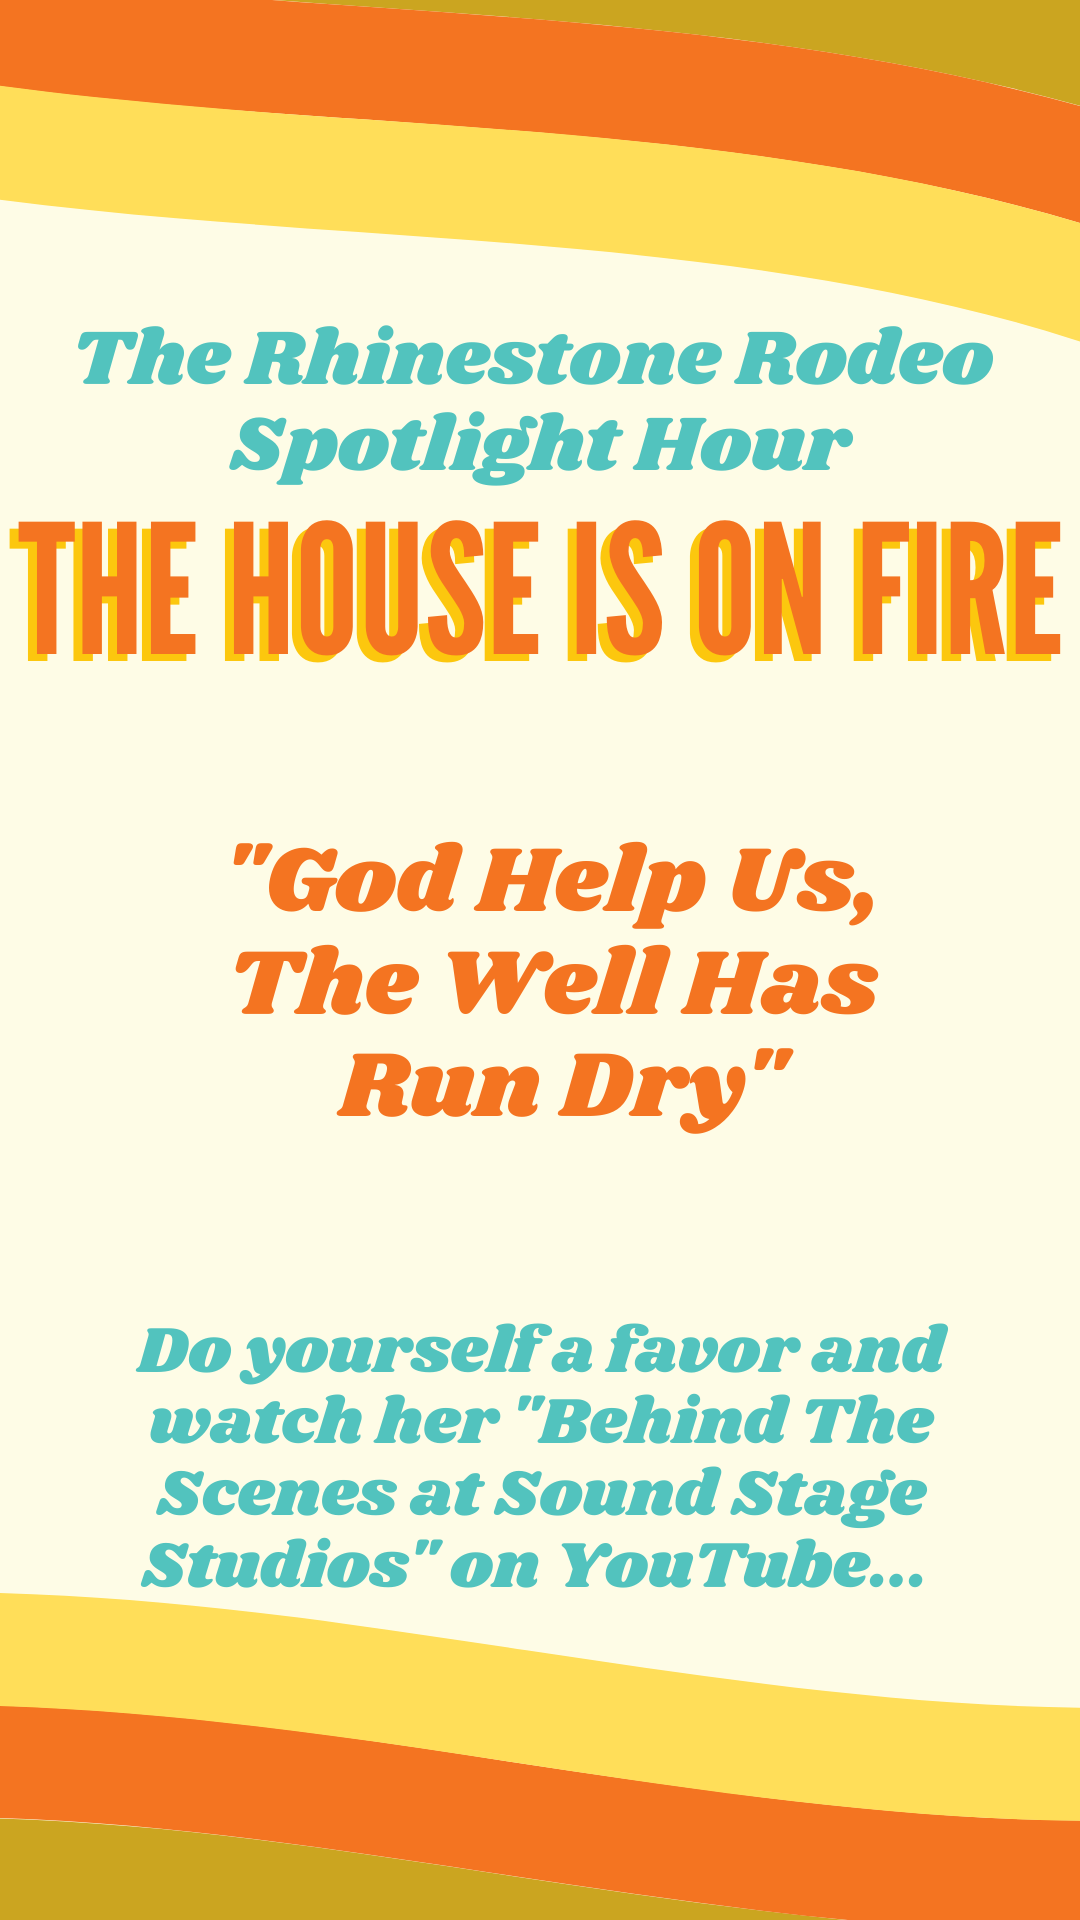 The House is on Fire Spotlight Hour